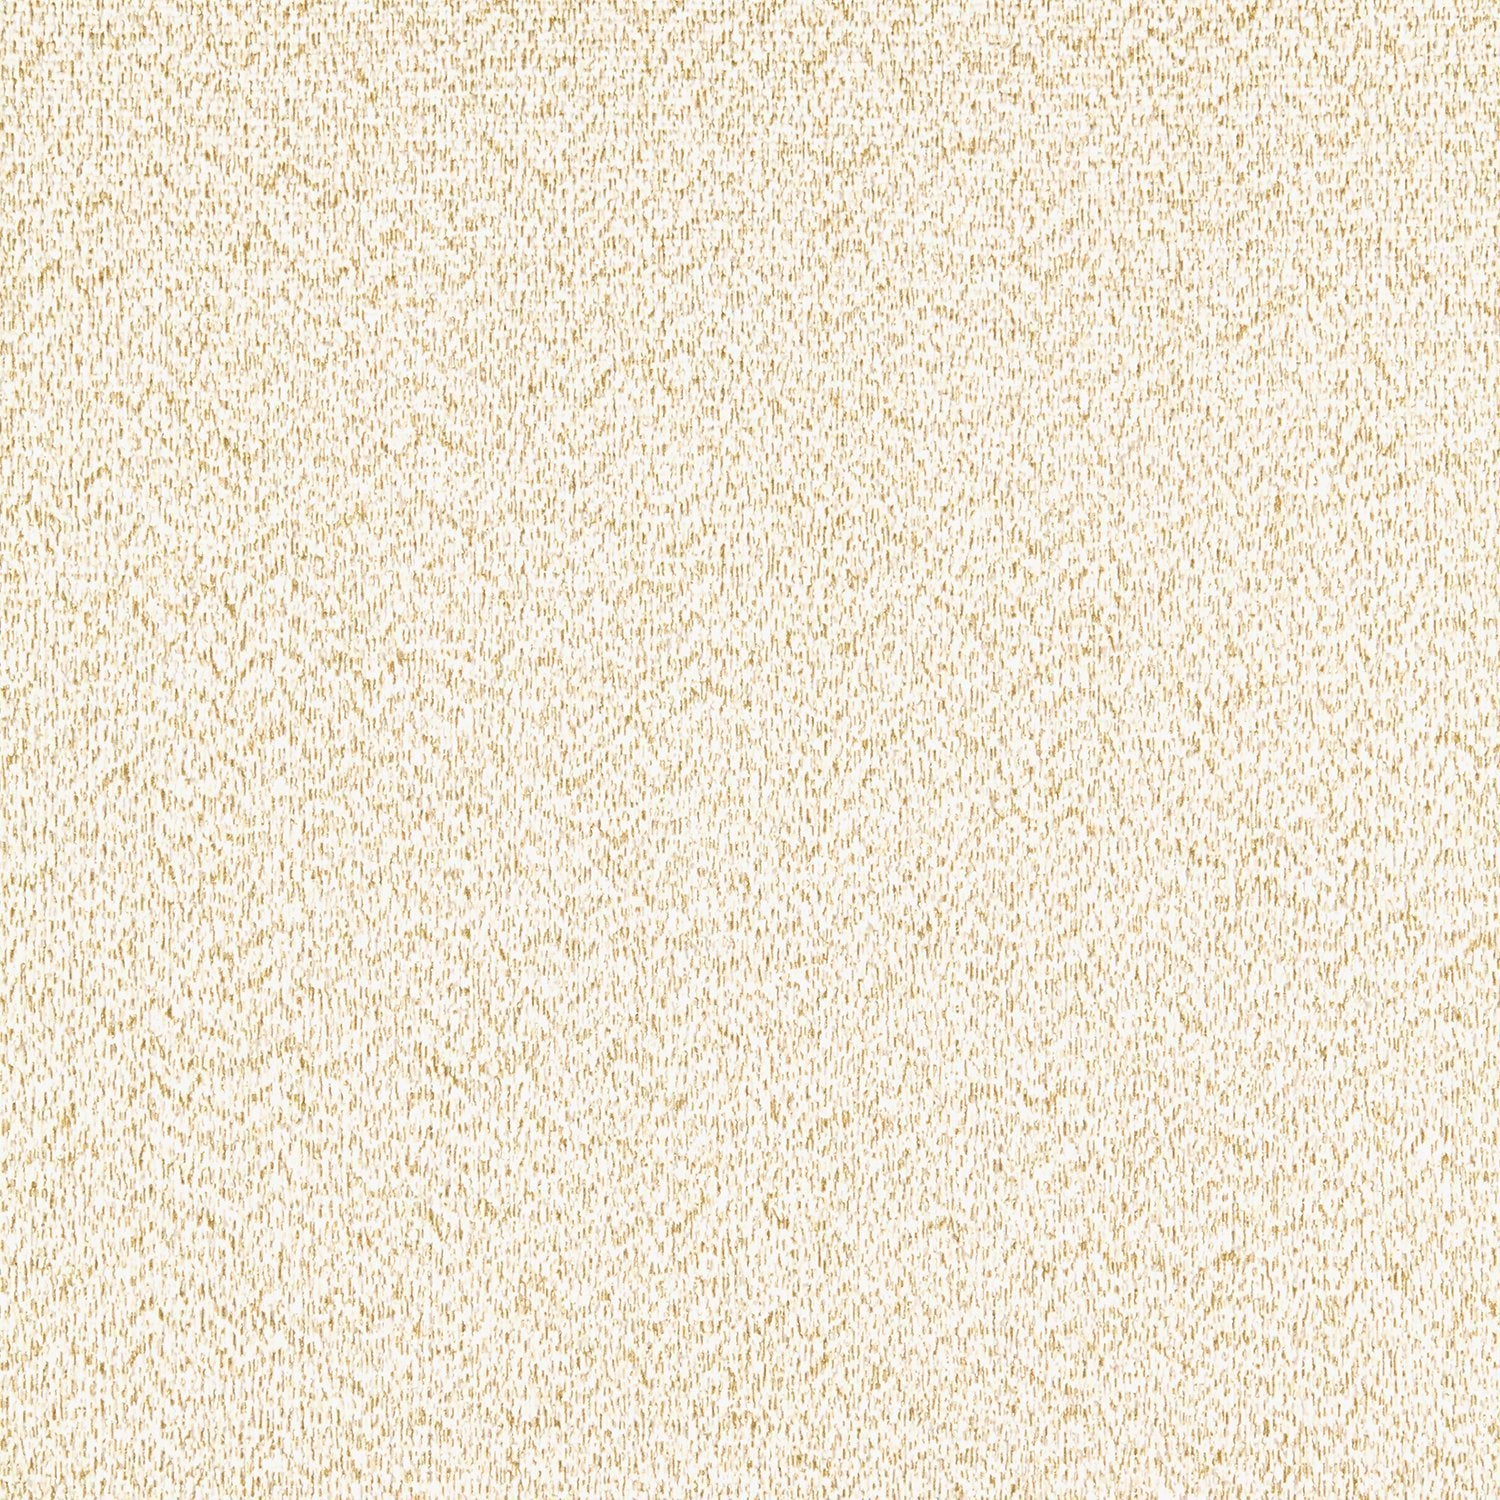 Tweed - Y46930 - Wallcovering - Vycon - Kube Contract